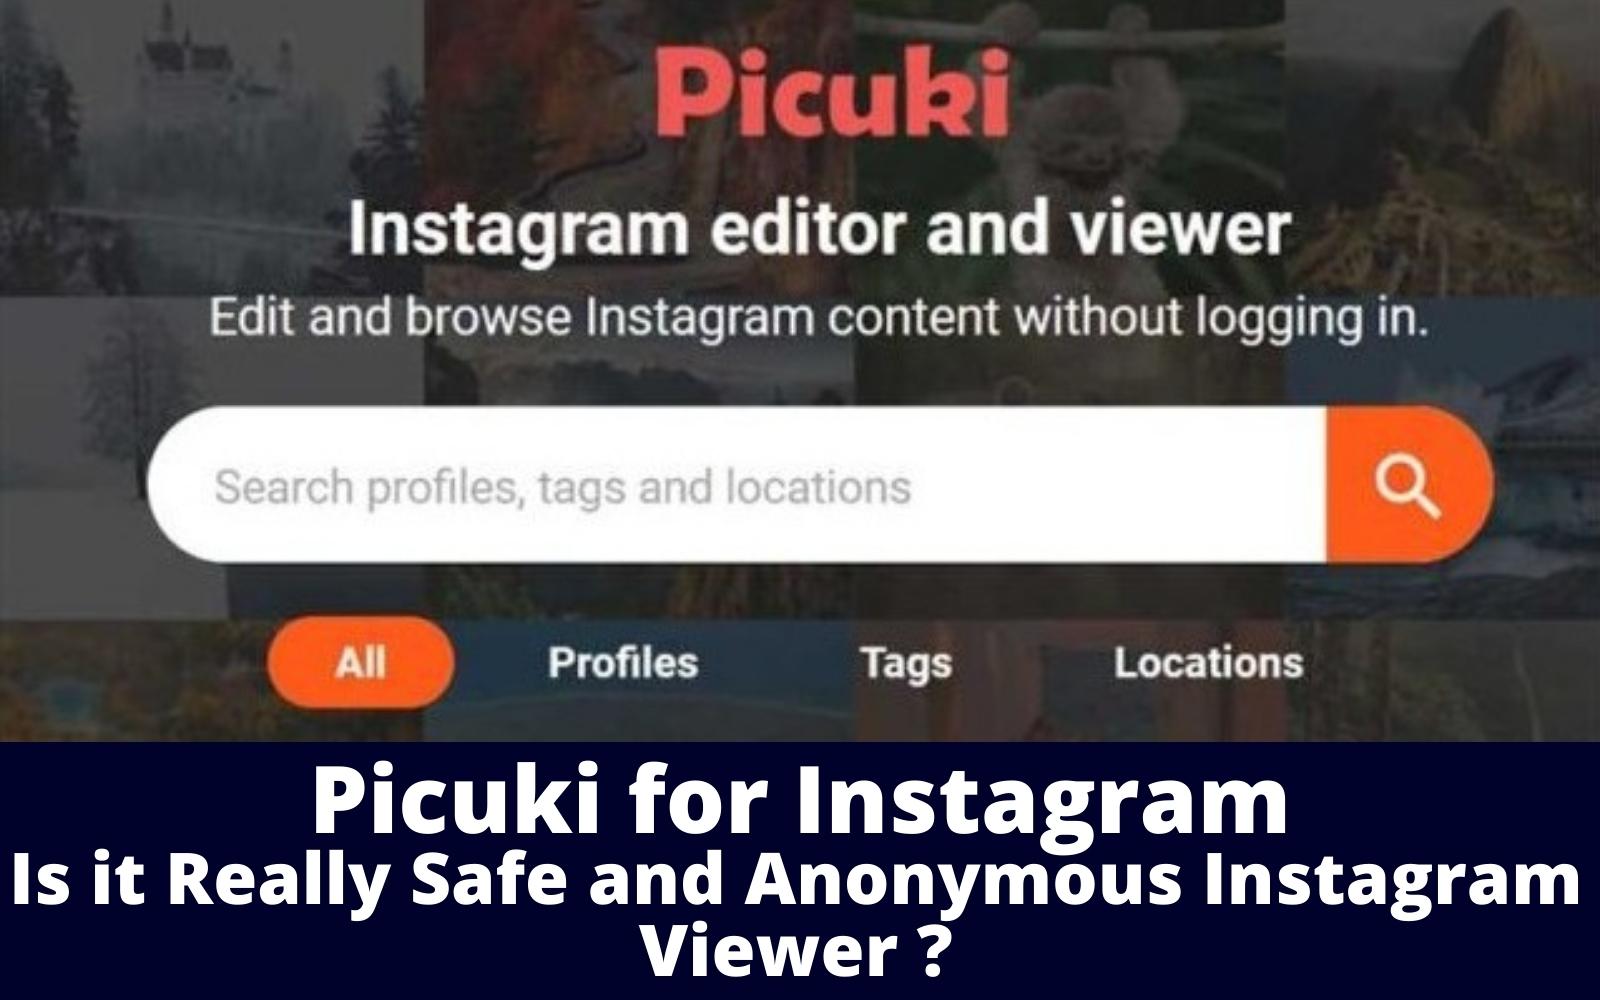 Picuki for Instagram - Is it Really Safe and Anonymous Instagram Viewer